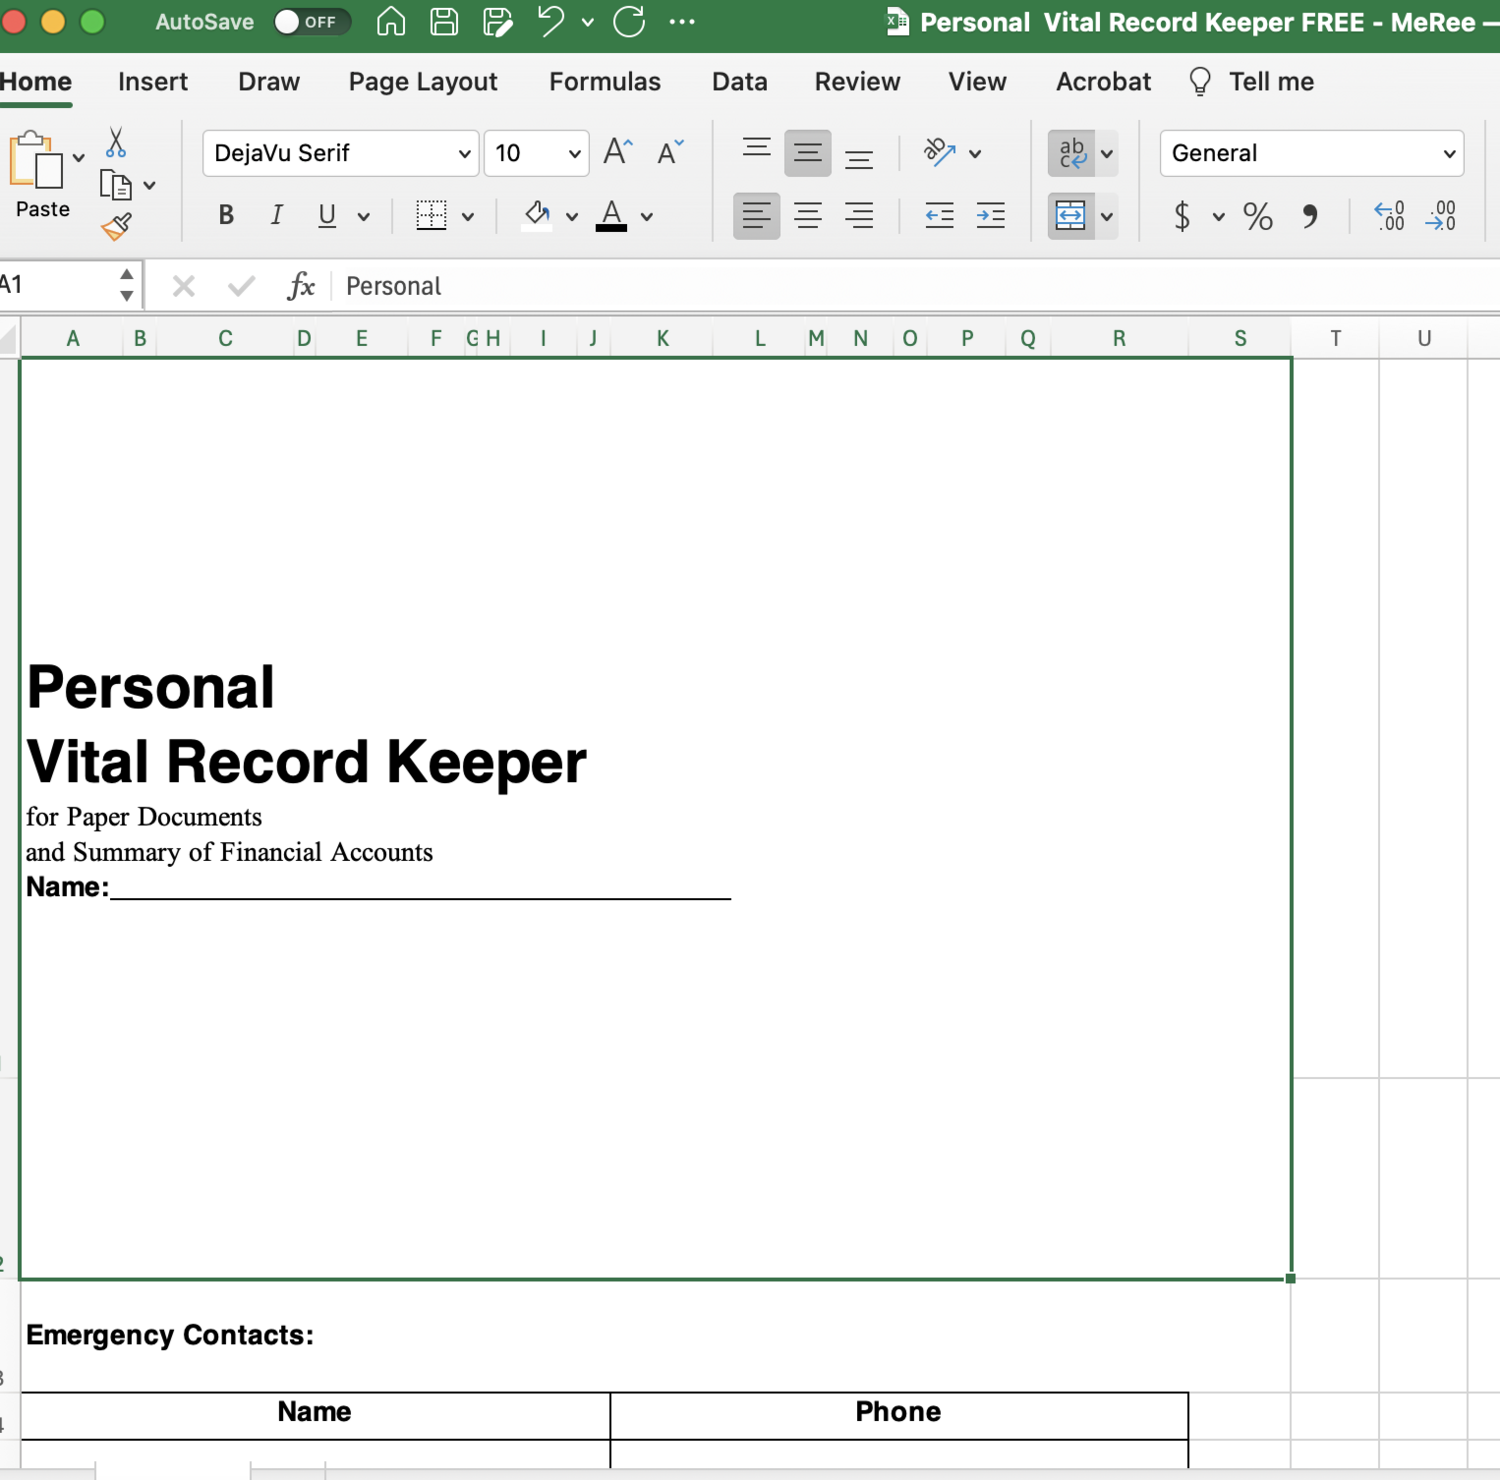 Free**Personal Record Organizer:
These files will be available to the customer once the order receives status Paid (it is free, add to cart and checkout.)